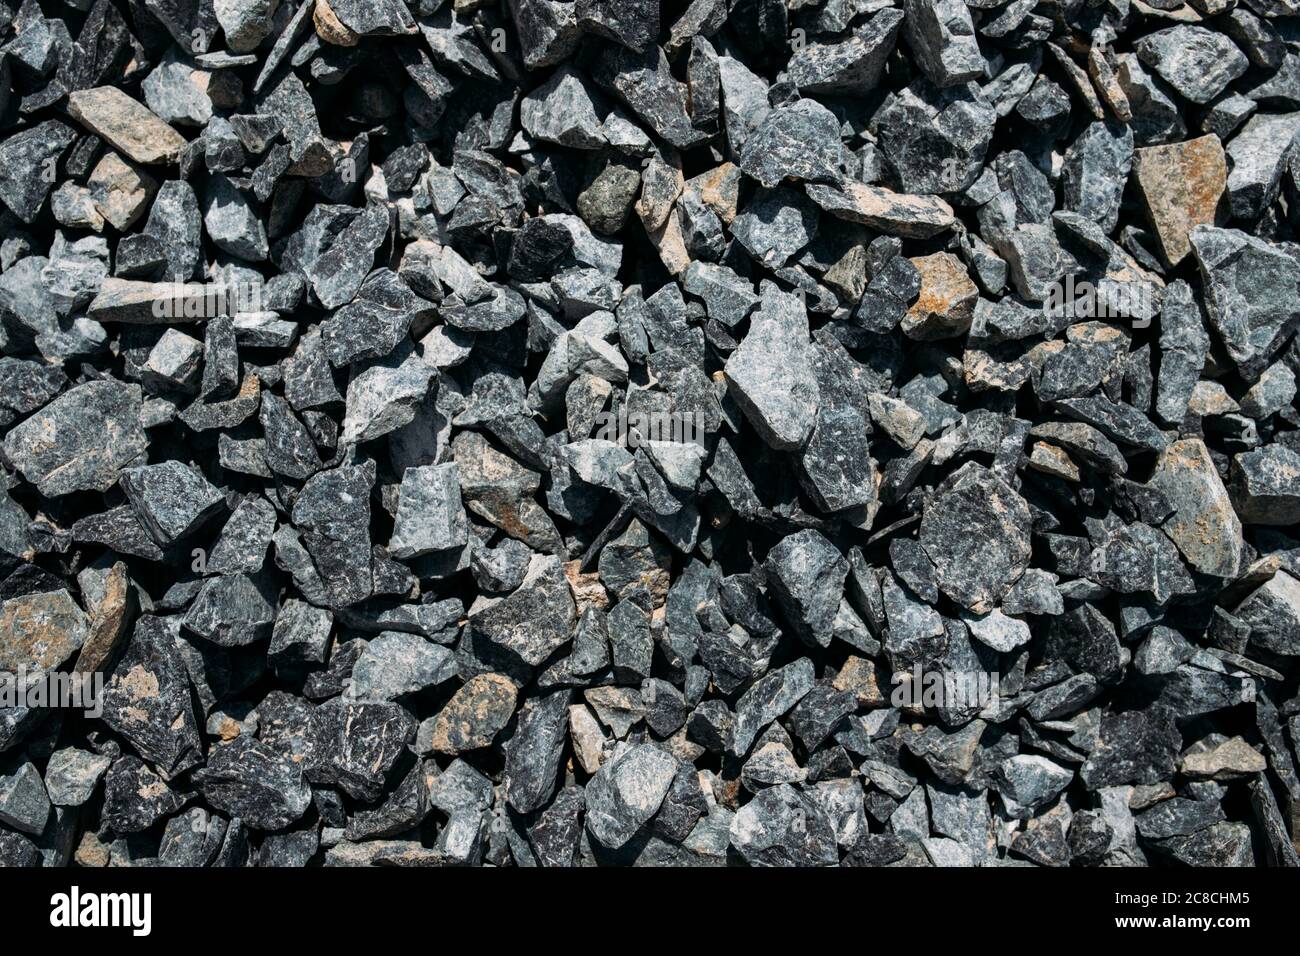 Rough stones, crushed stone, granite gravel close-up. The rough texture of the stone. Building material background. Texture Stock Photo